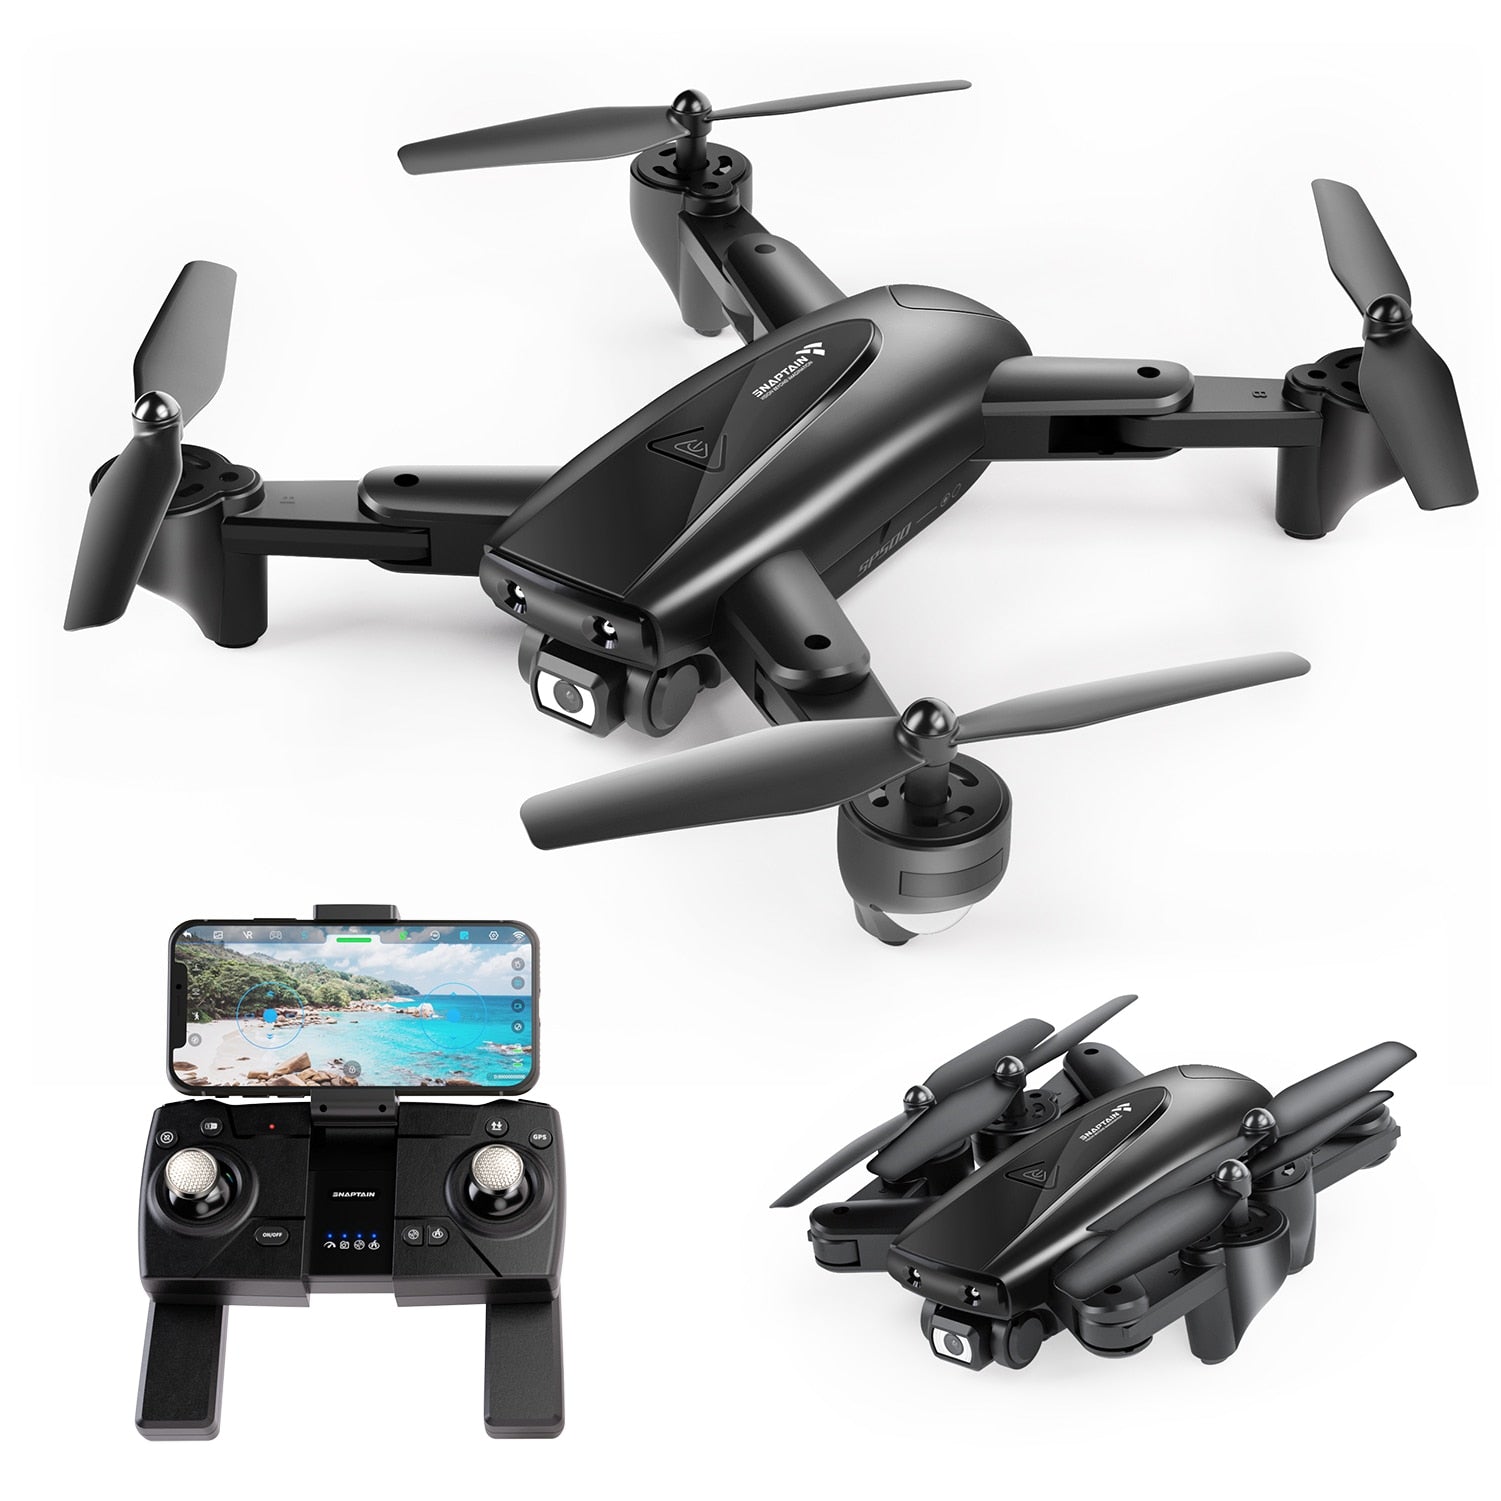 SNAPTAIN SP500 GPS 1080P HD RC Drone